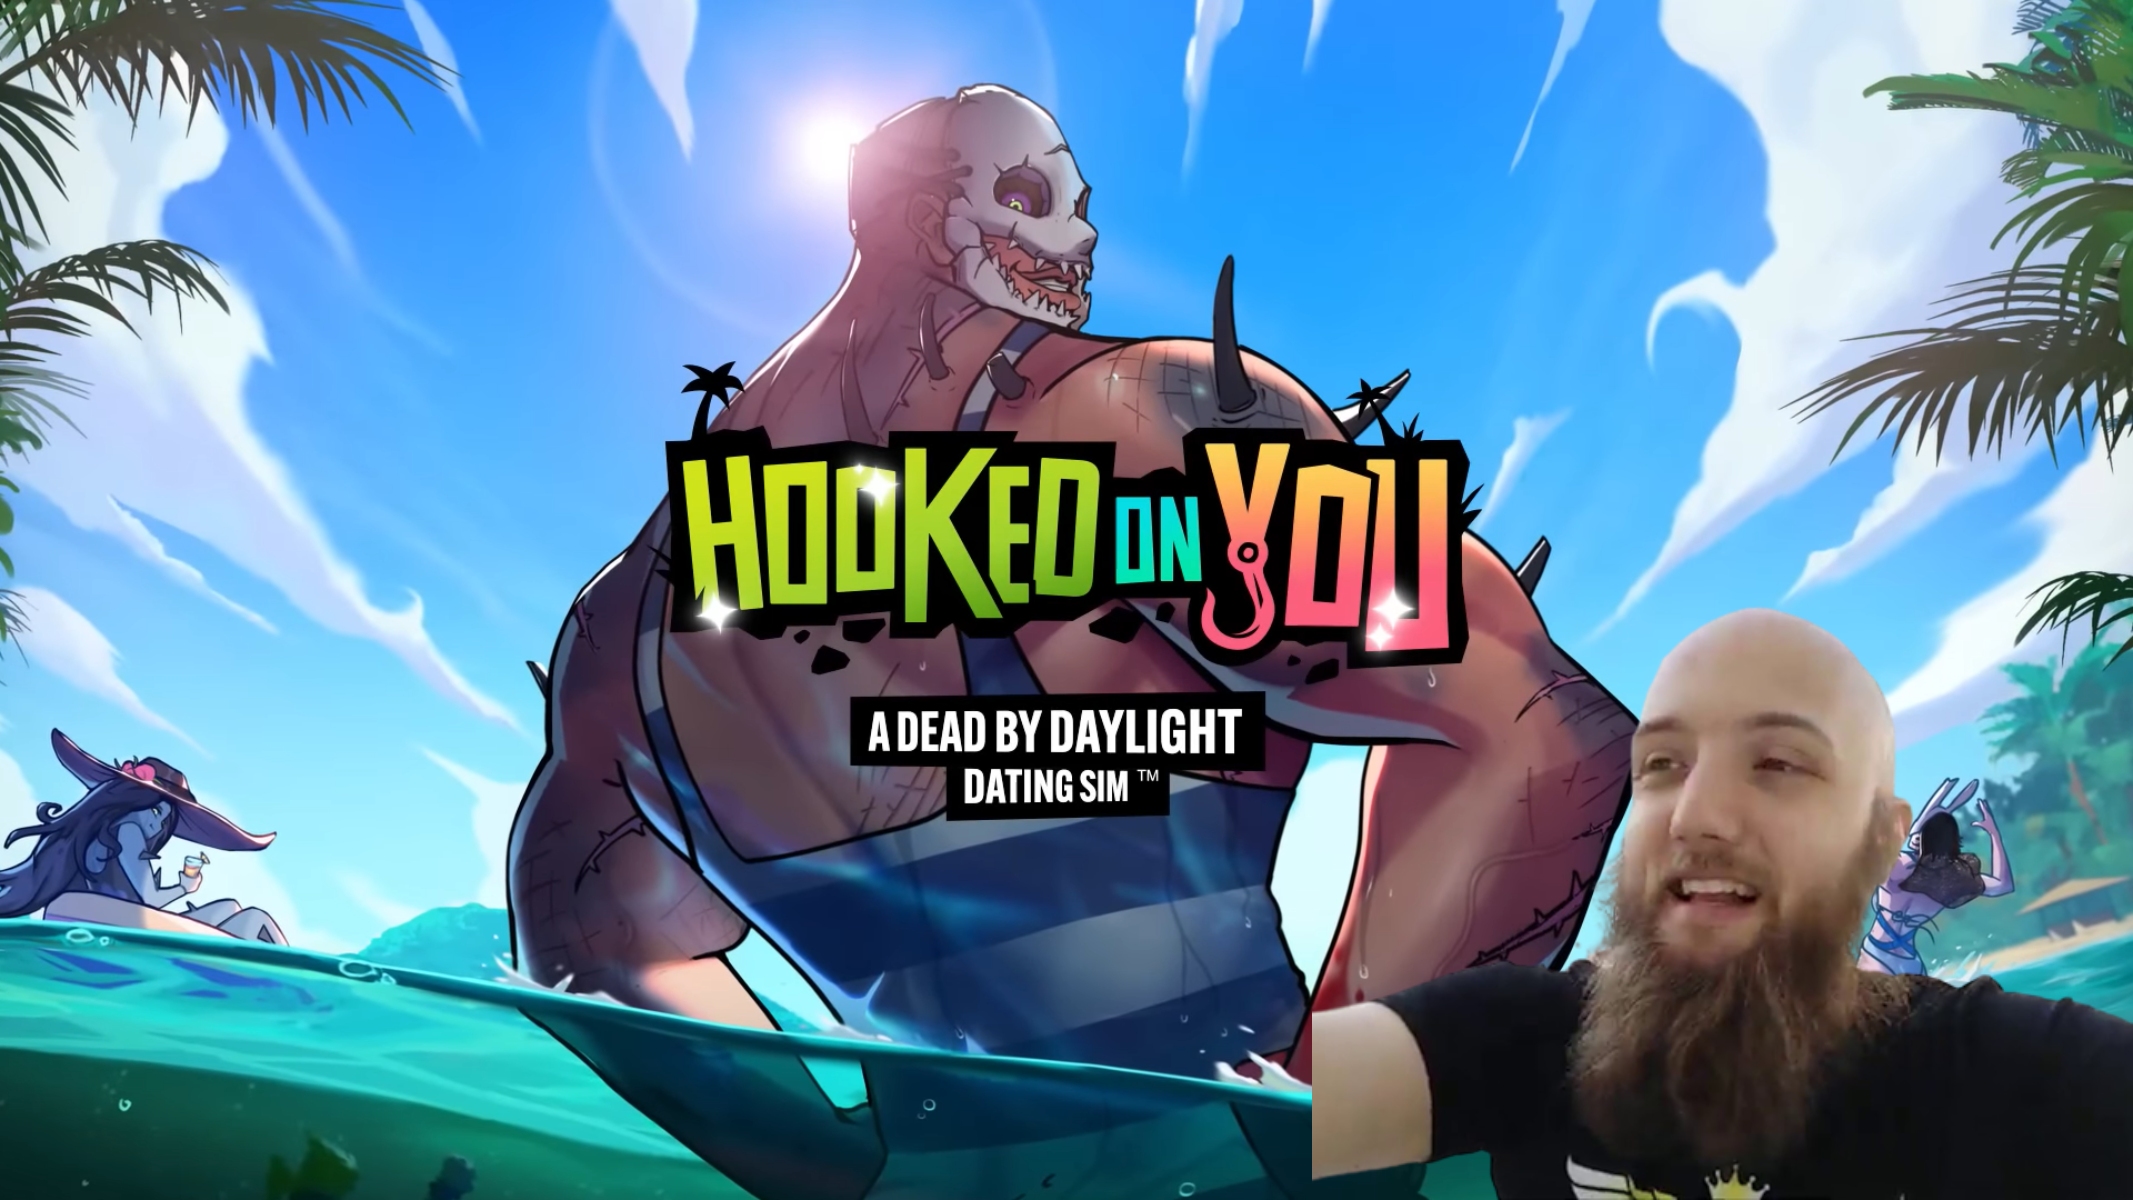 Dead By Daylight Hooked on You